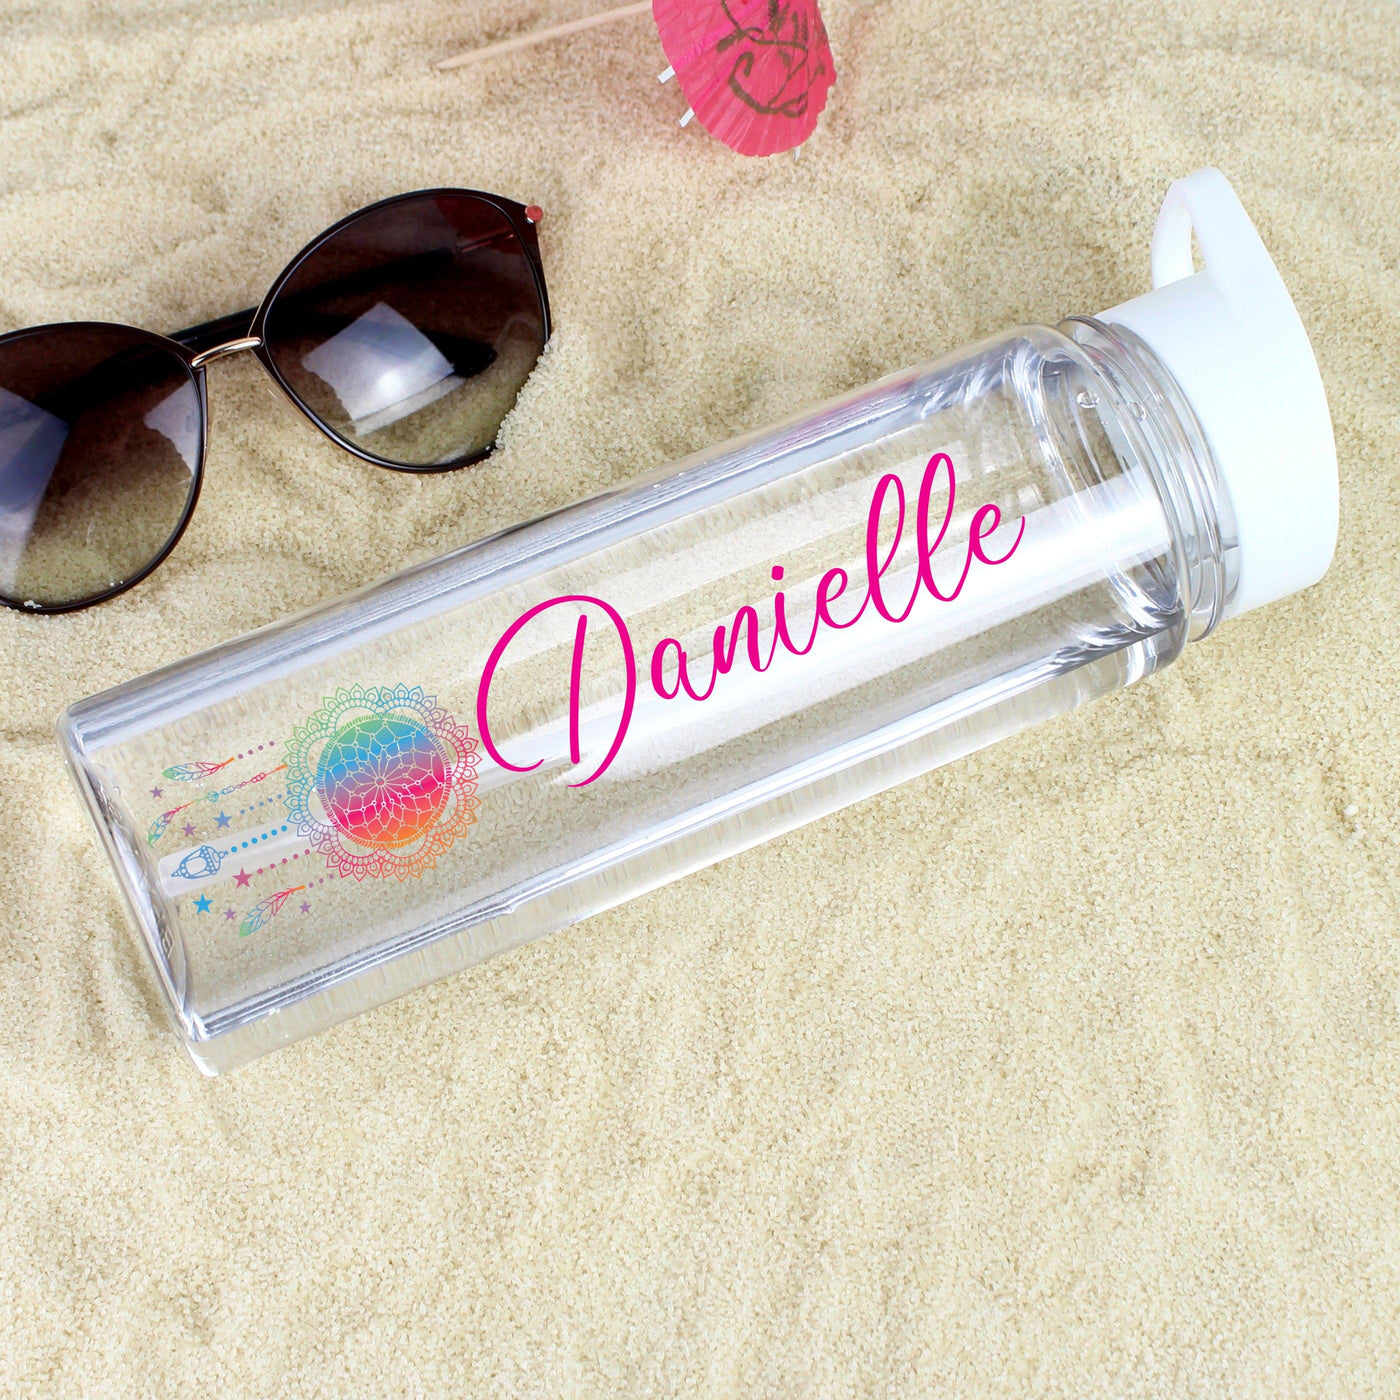 Personalised Dream Catcher Name Only Water Bottle - Shop Personalised Gifts